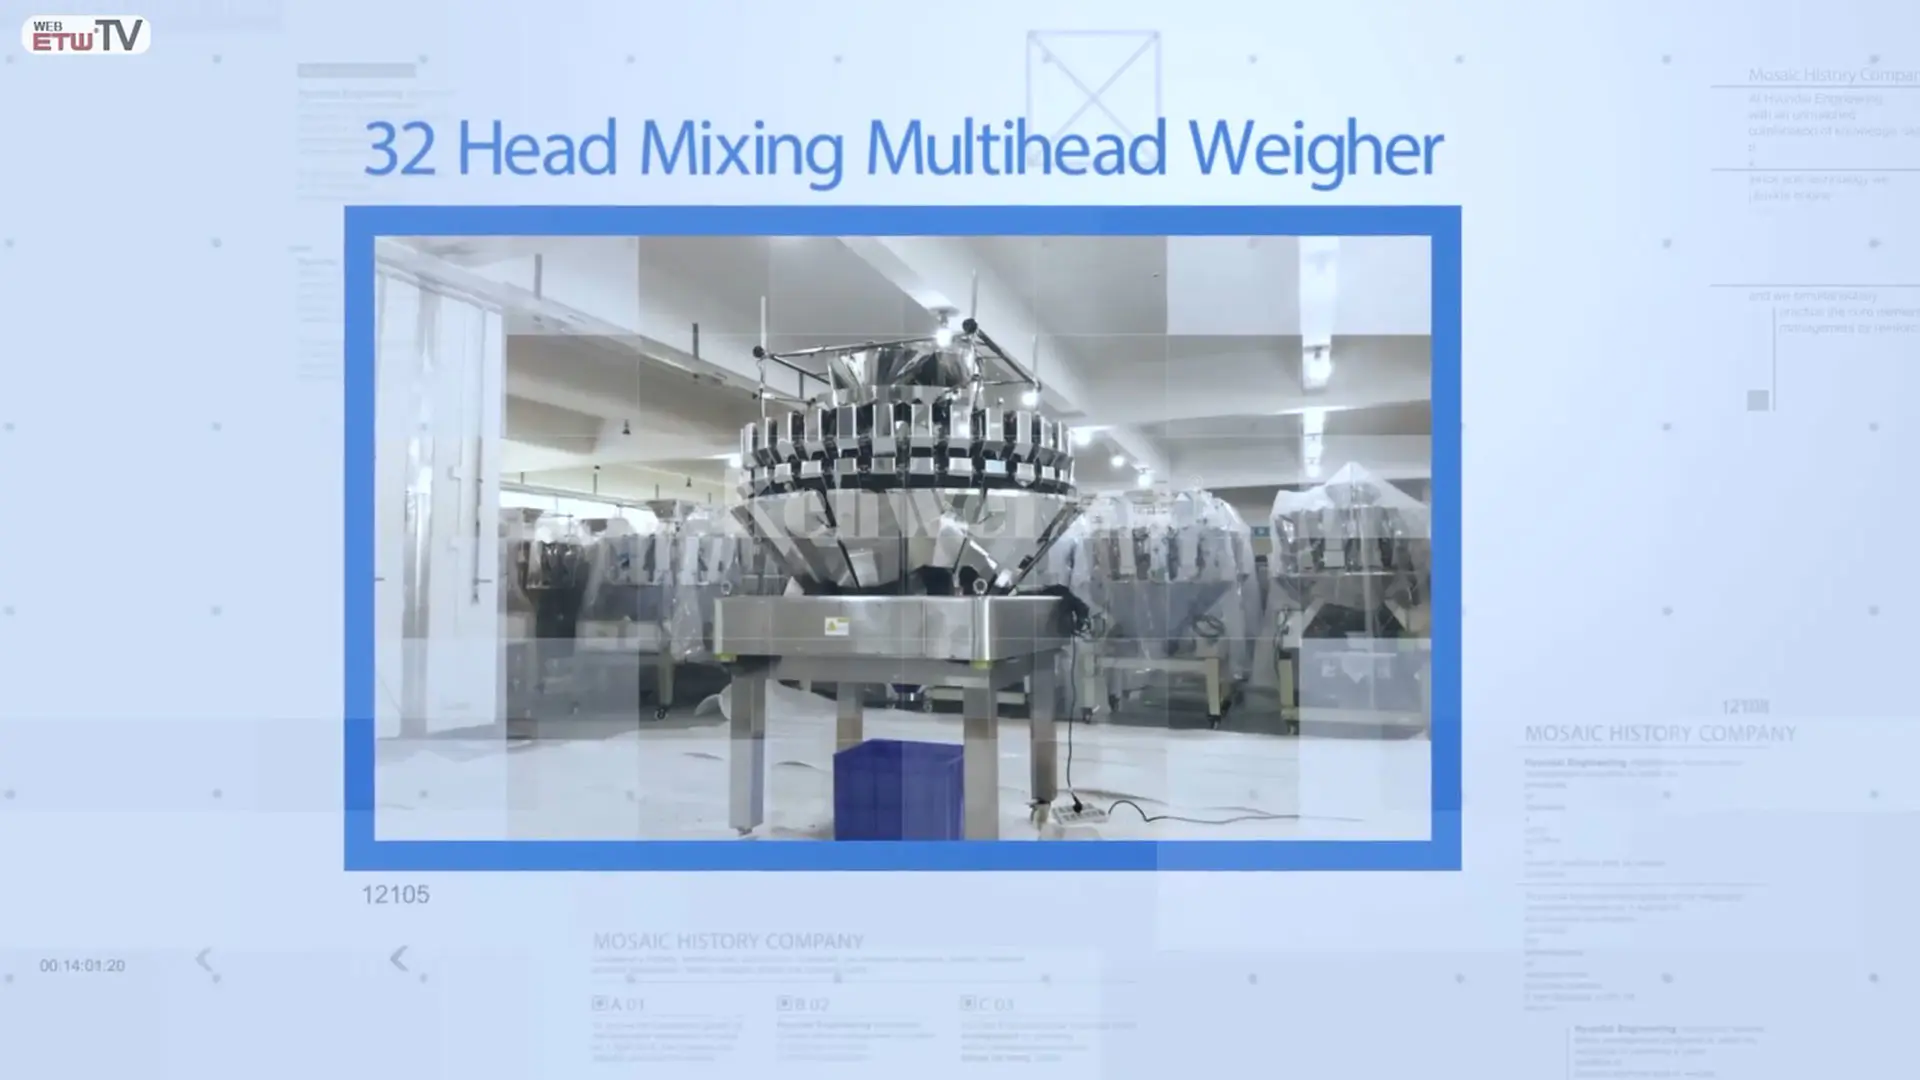 4 in 1 Mixing Multihead Weigher